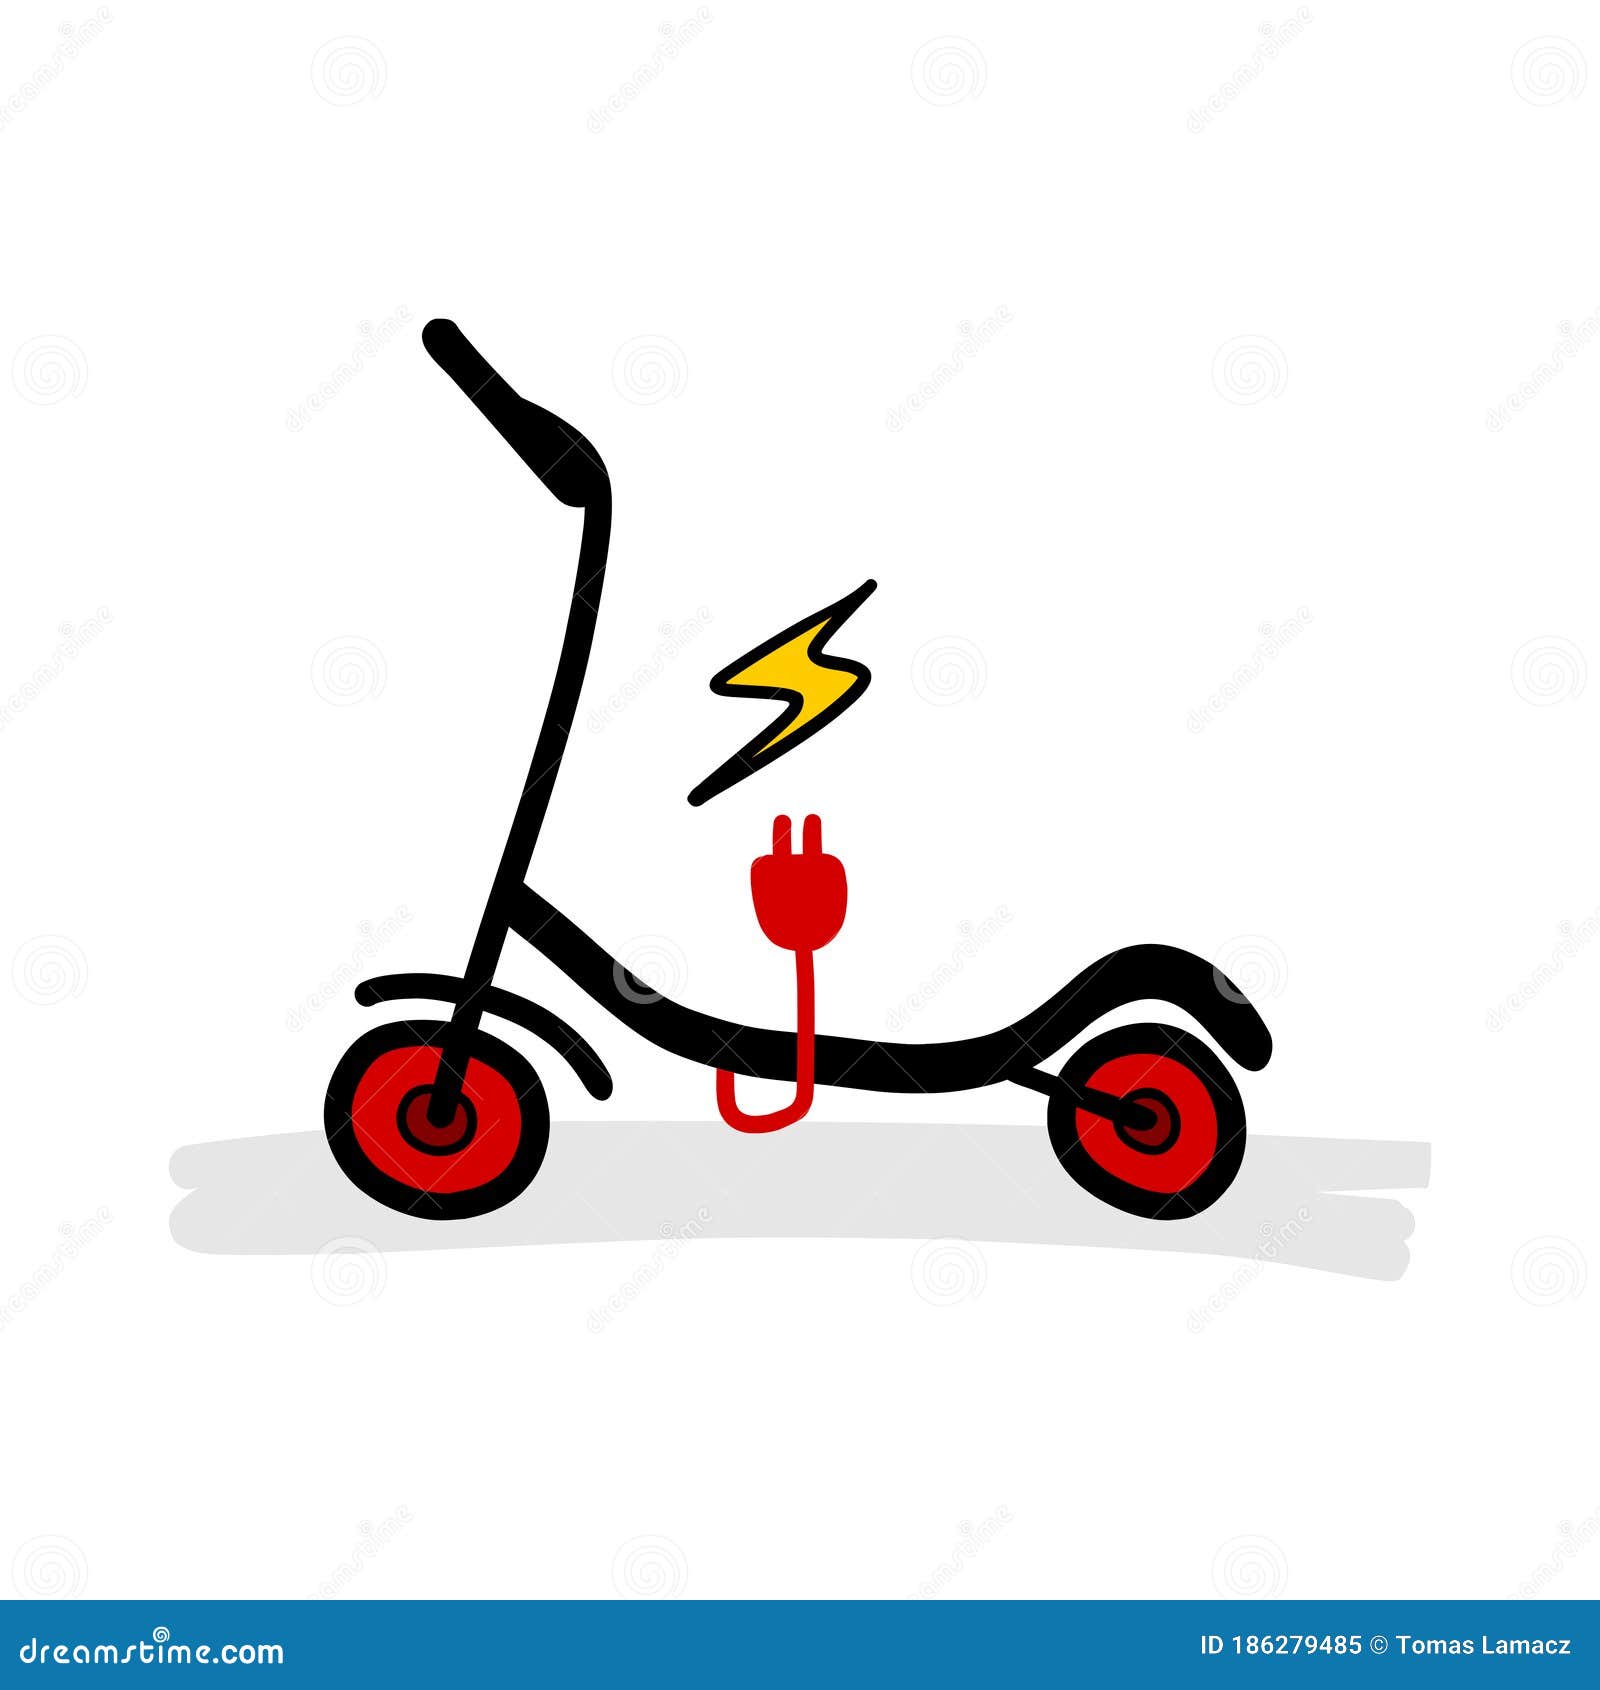 Red and Black Eco Electric Scooter. Cartoon Illustration Hand Drawn on  White Background Stock Vector - Illustration of hand, electric: 186279485